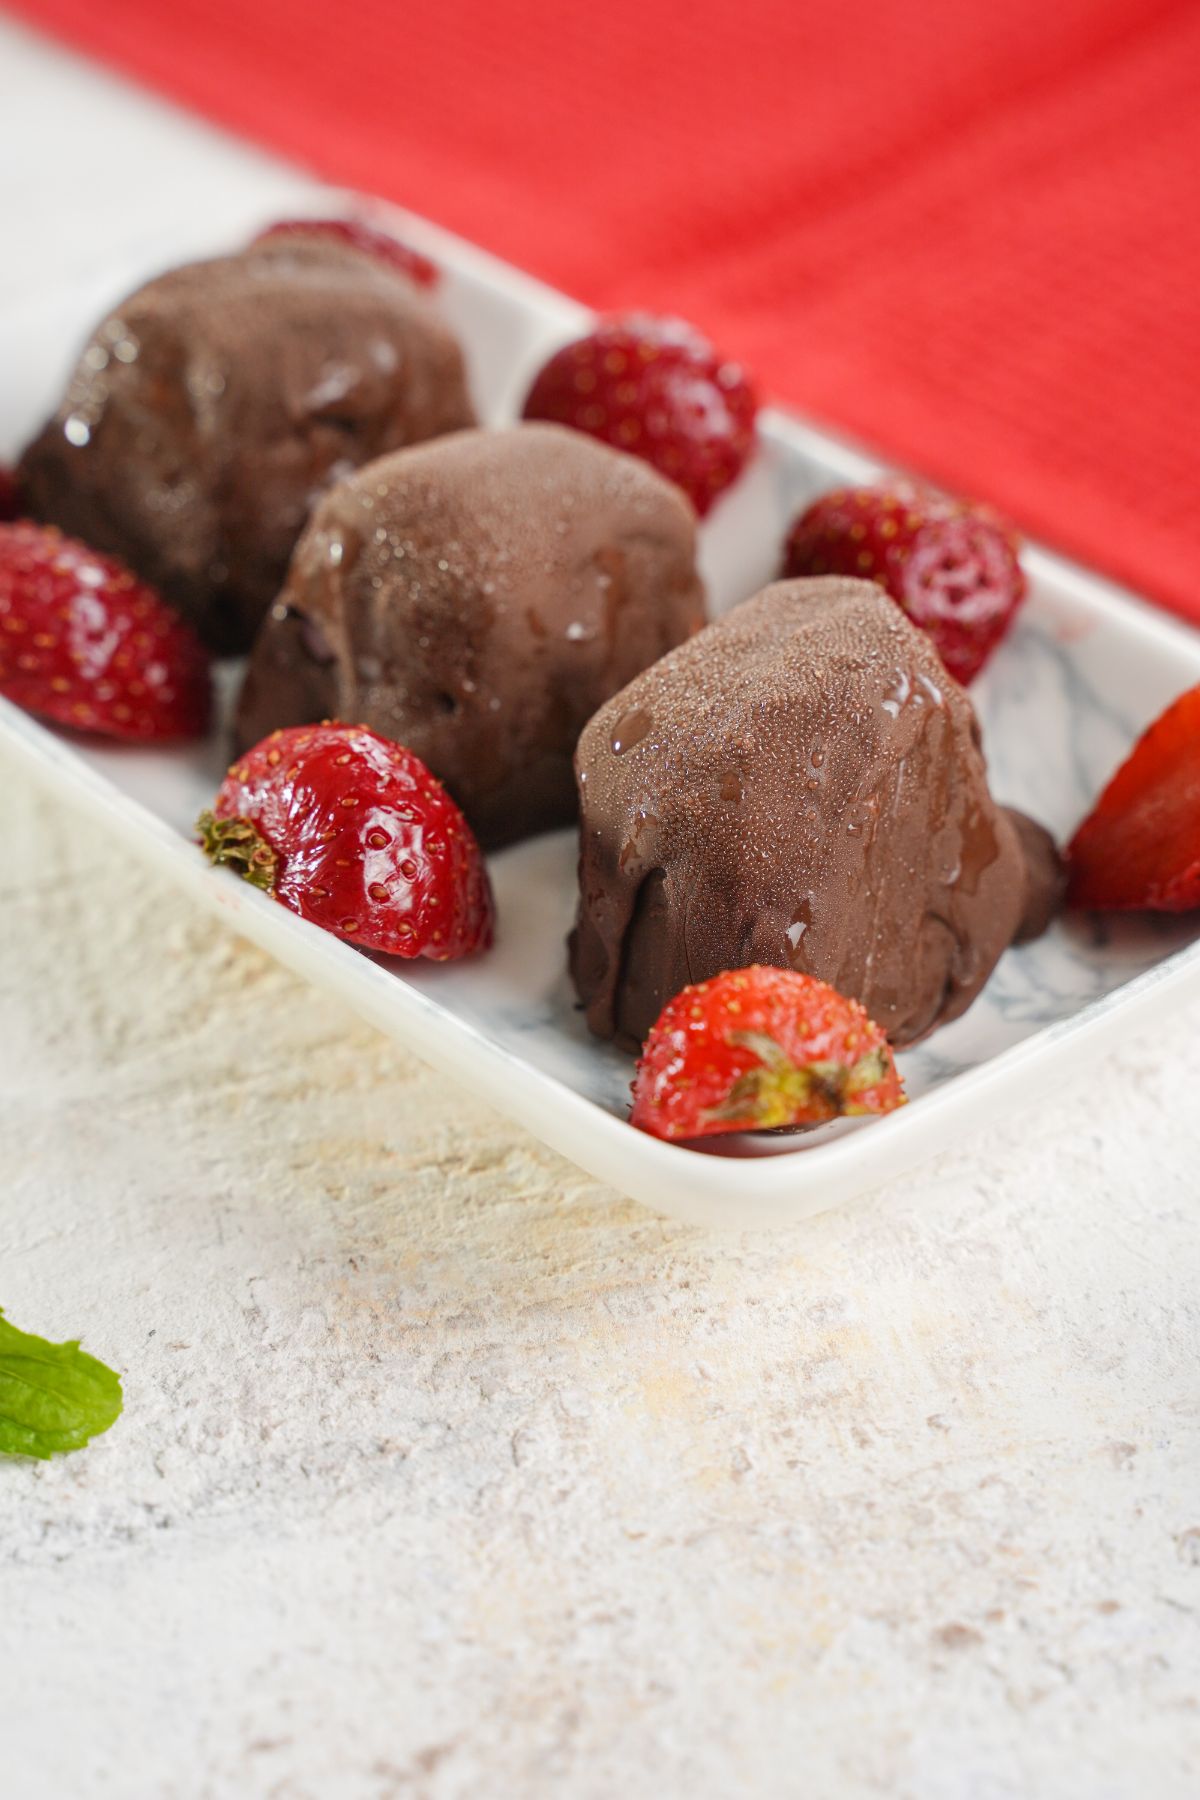 white bowl of chocolate bonbons with strawberries sitting on white table with red napkin